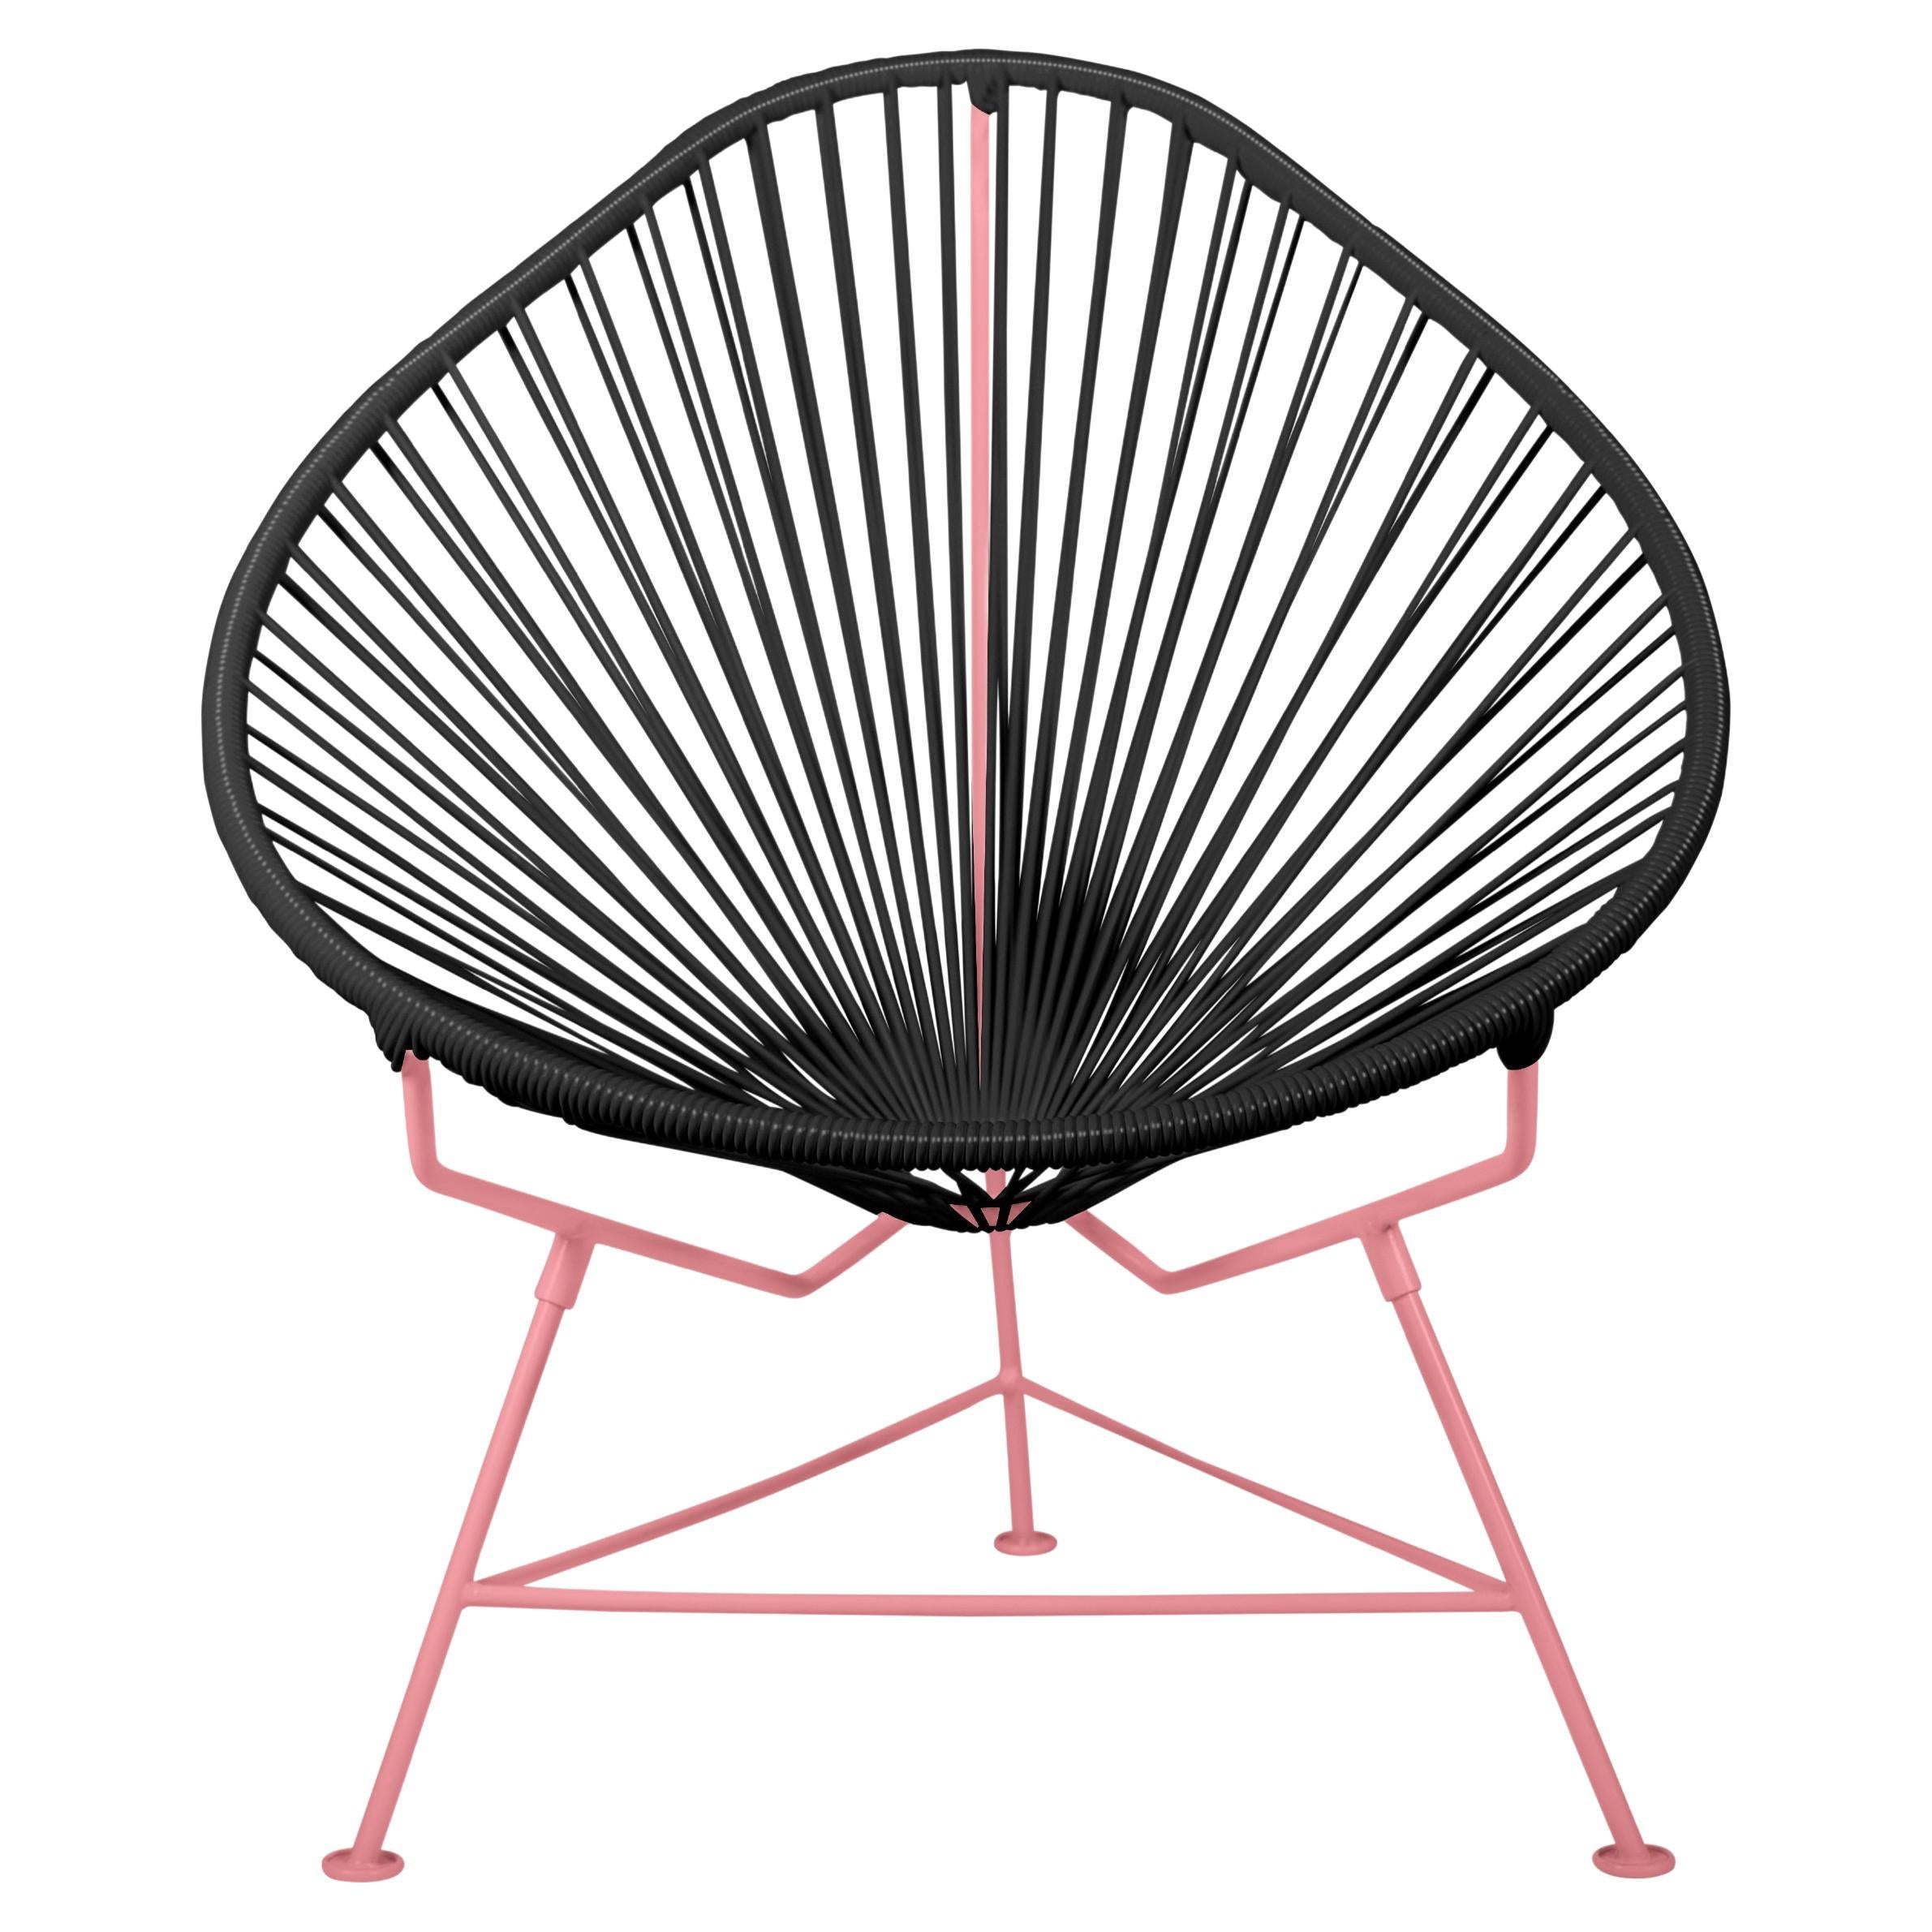 Innit Designs Acapulco Chair Black Weave on Coral Frame For Sale